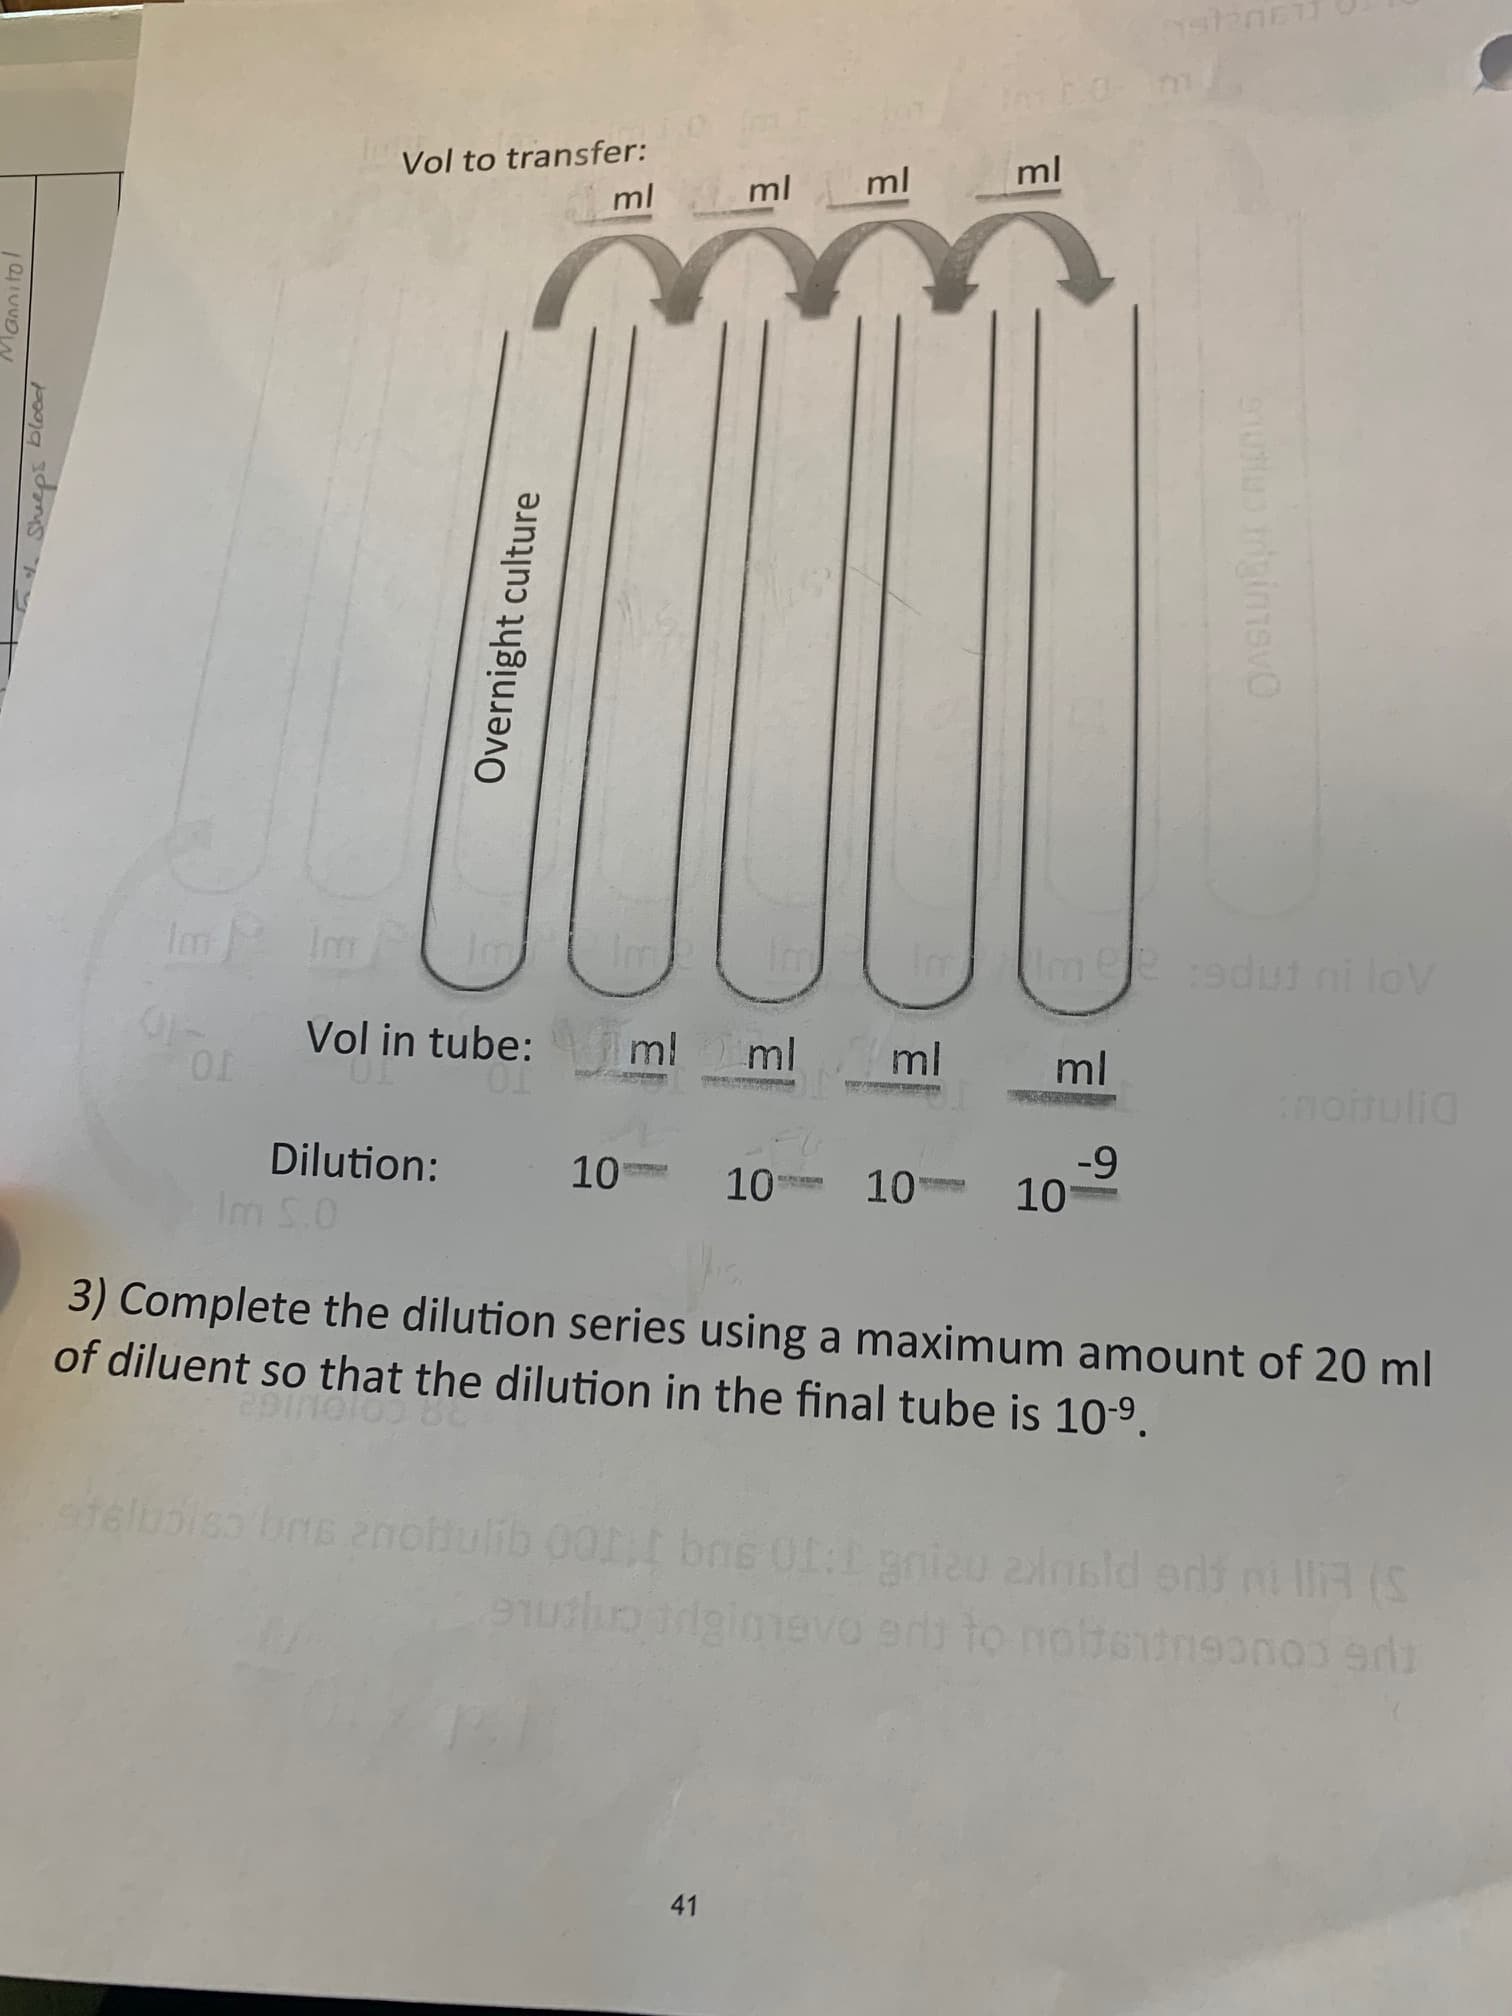 Vol to transfer:
ml
ml
ml
ml
Im Im
Im
Imeedut ni lov
Vol in tube: ml ml
ml
ml
TO.
notulia
Dilution:
Im S.0
-9
10
10
10
10
3) Complete the dilution series using a maximum amount of 20 ml
of diluent so that the dilution in the final tube is 10-9.
afelusisa bns anchulib 00t bne 011 gniau 2insld erd ni llR (S
gimevo e to nobetneonos er
41
Mannitol
Sheeps blood
Overnight culture
